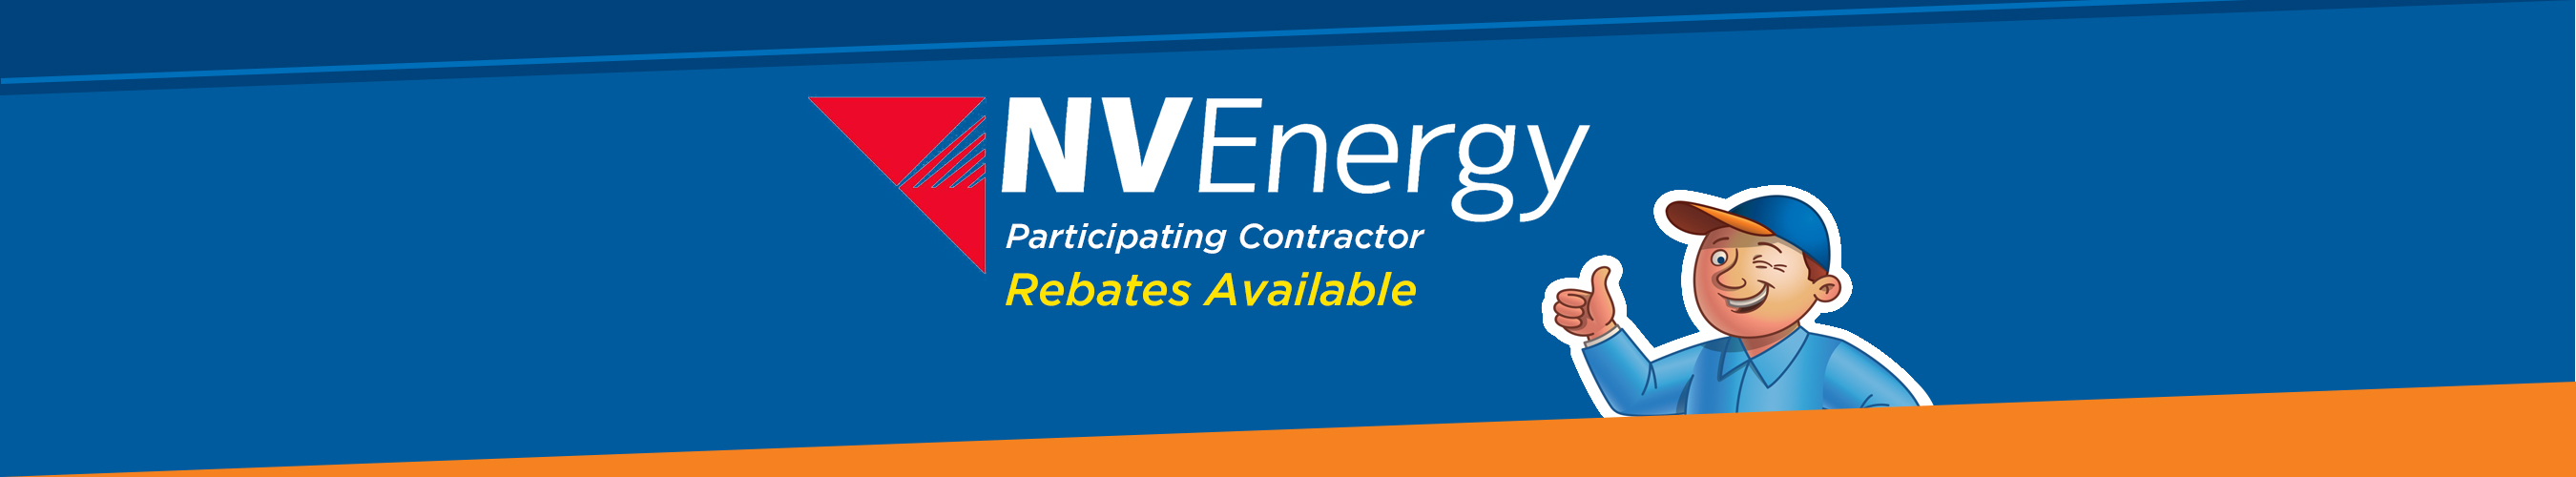 NV Energy AC and Heating Rebate Up to 1575